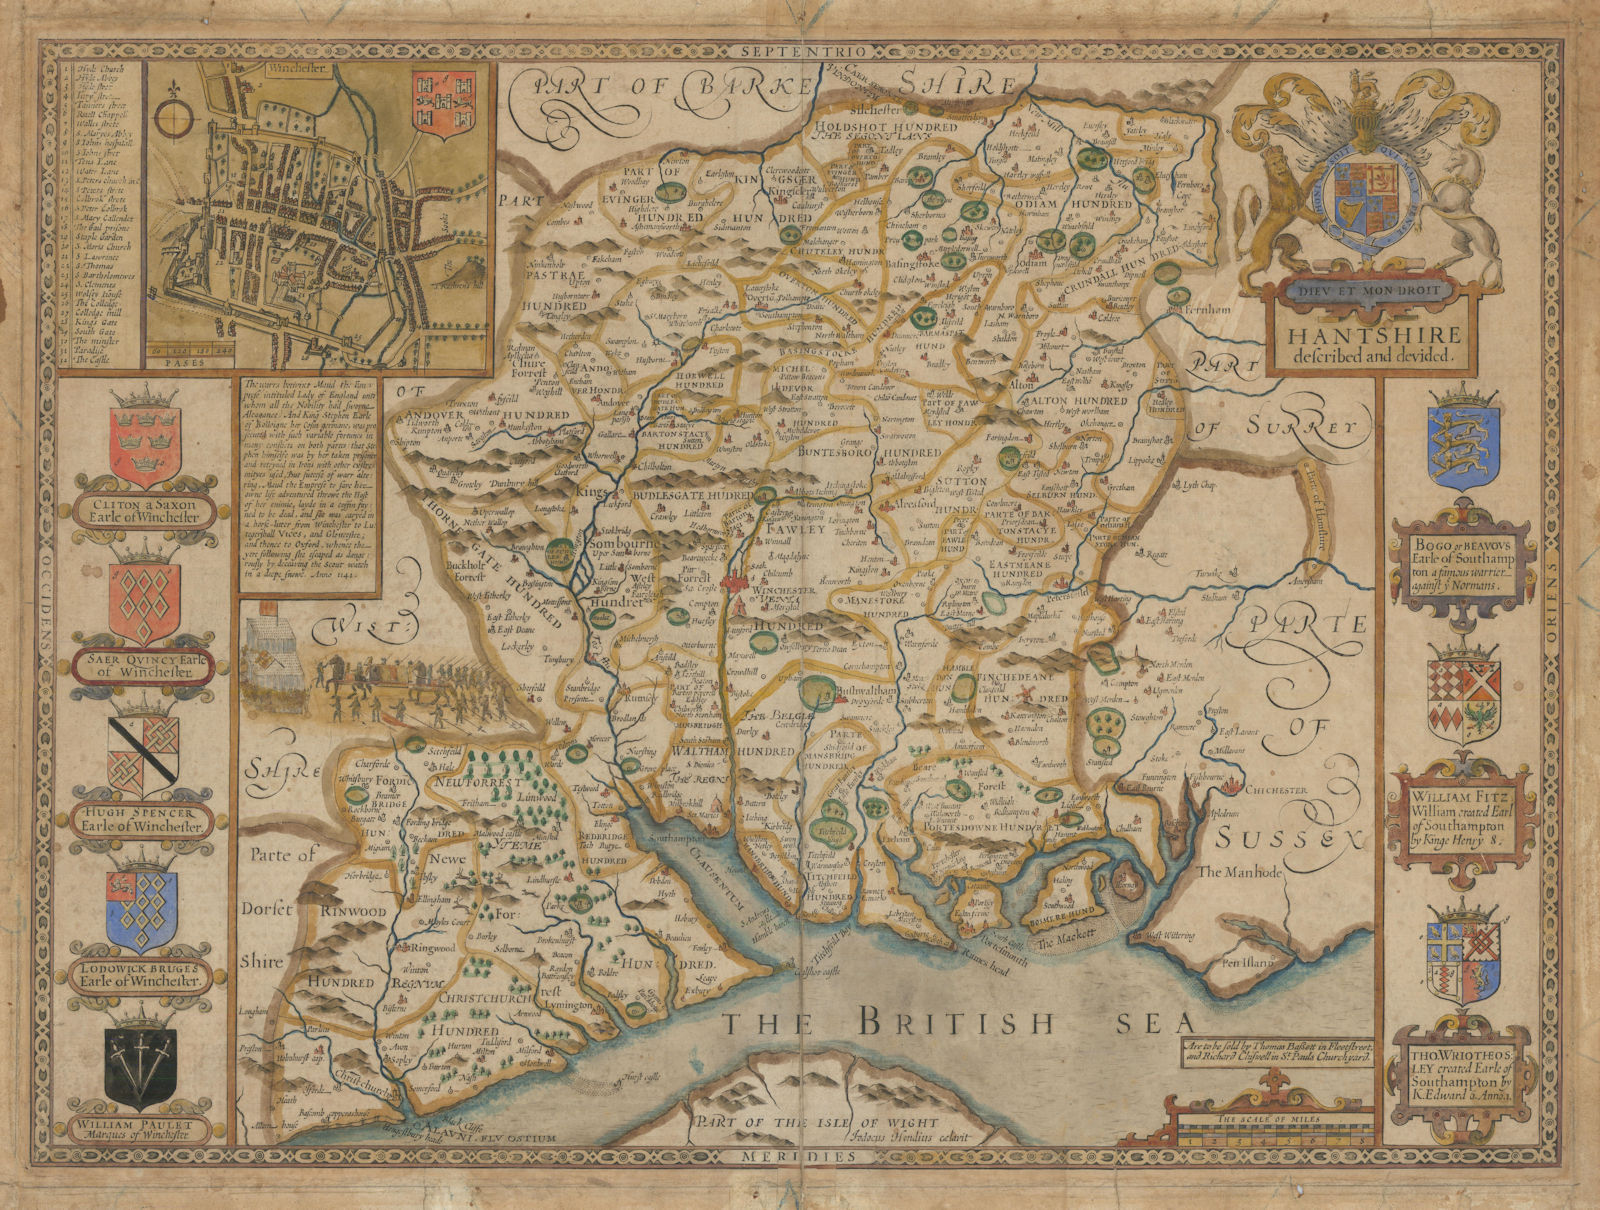 Associate Product Hantshire. Hampshire county map by John Speed. Bassett/Chiswell edition 1676